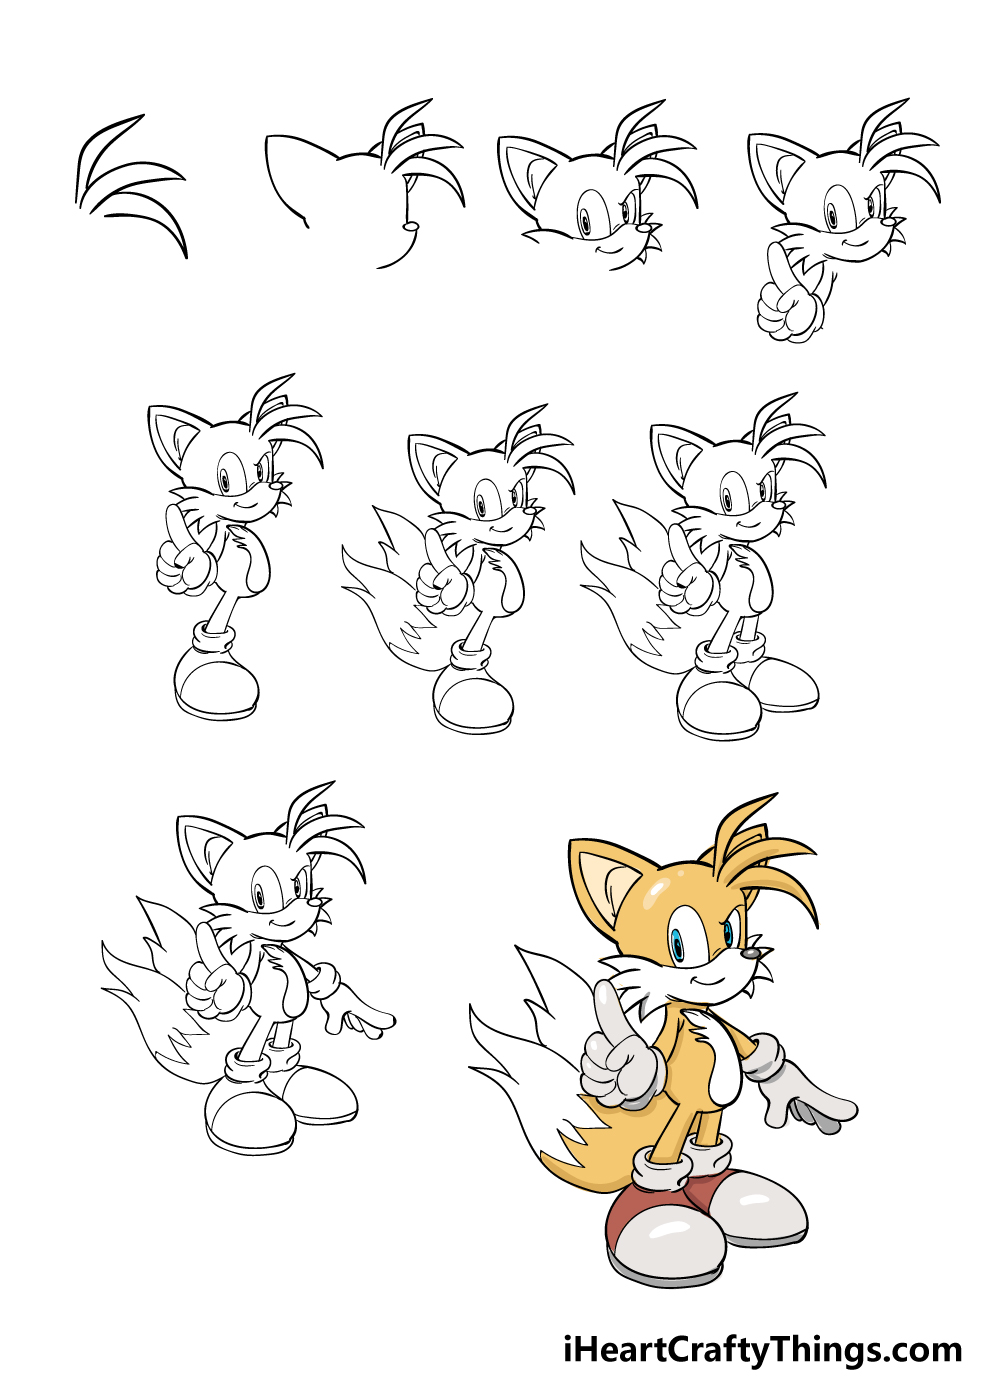 How To Draw Tails The Fox chat site